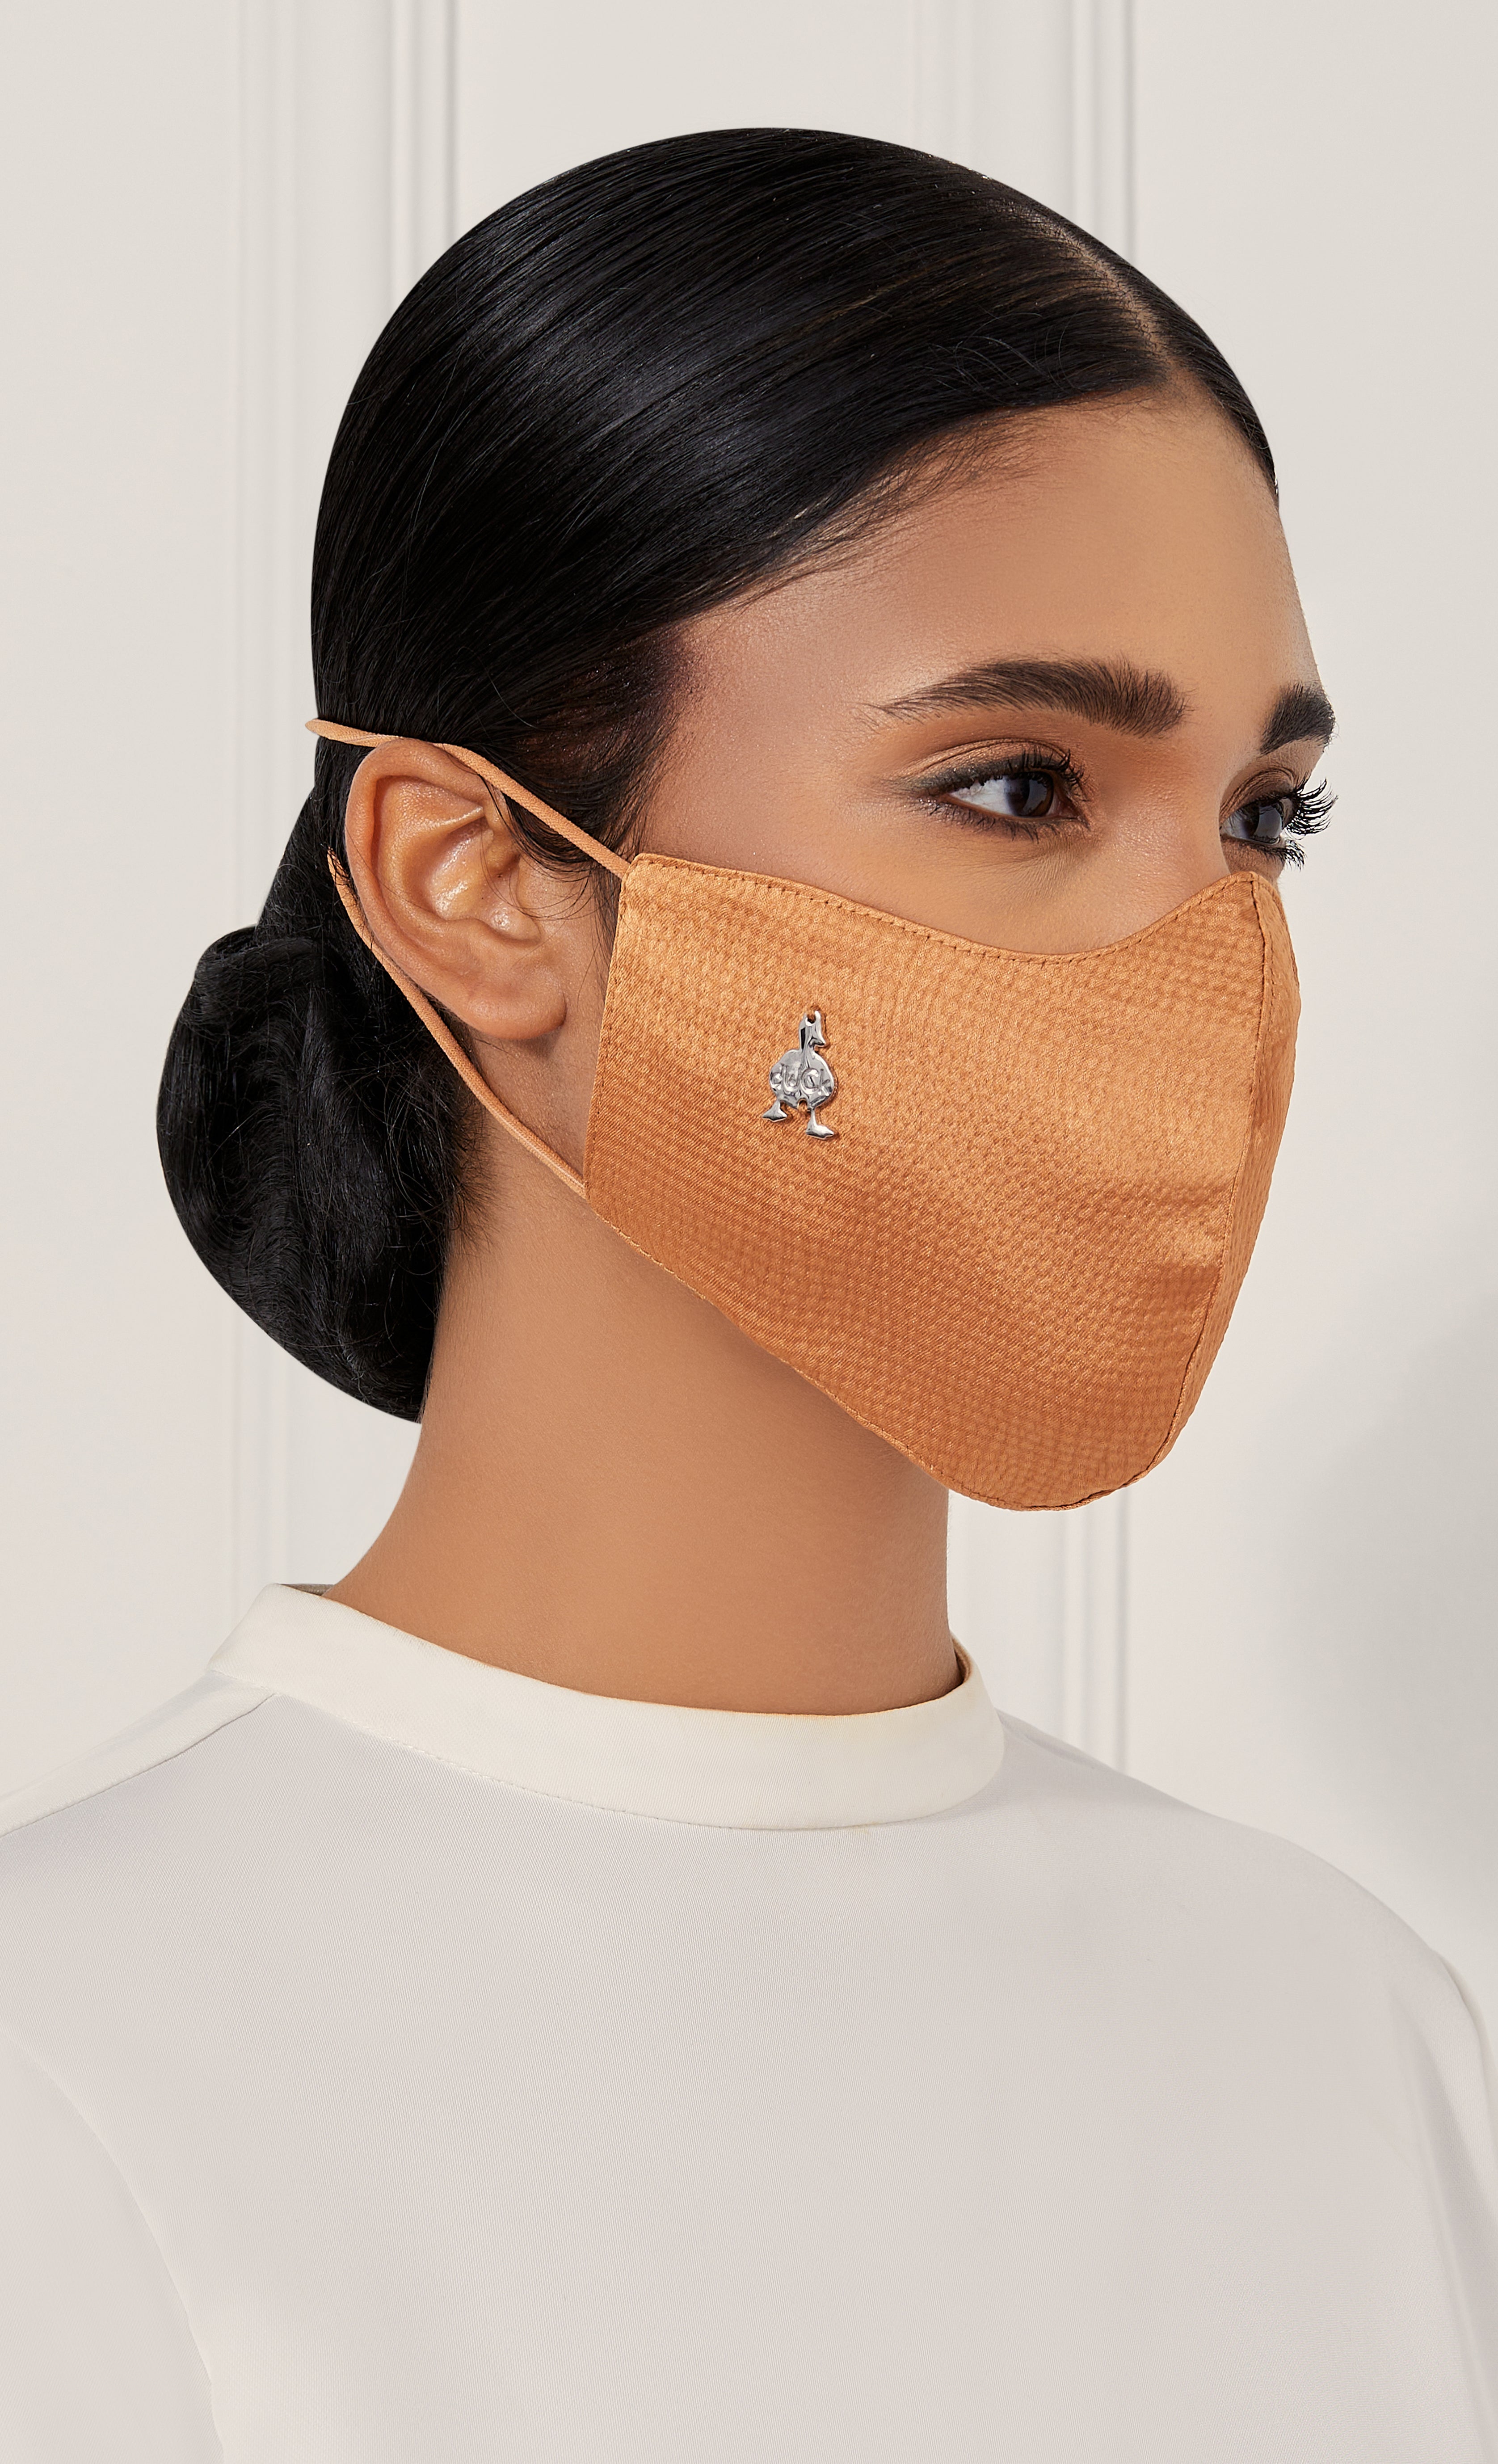 Woven Face Mask (Head-loop) in Toffee Nut